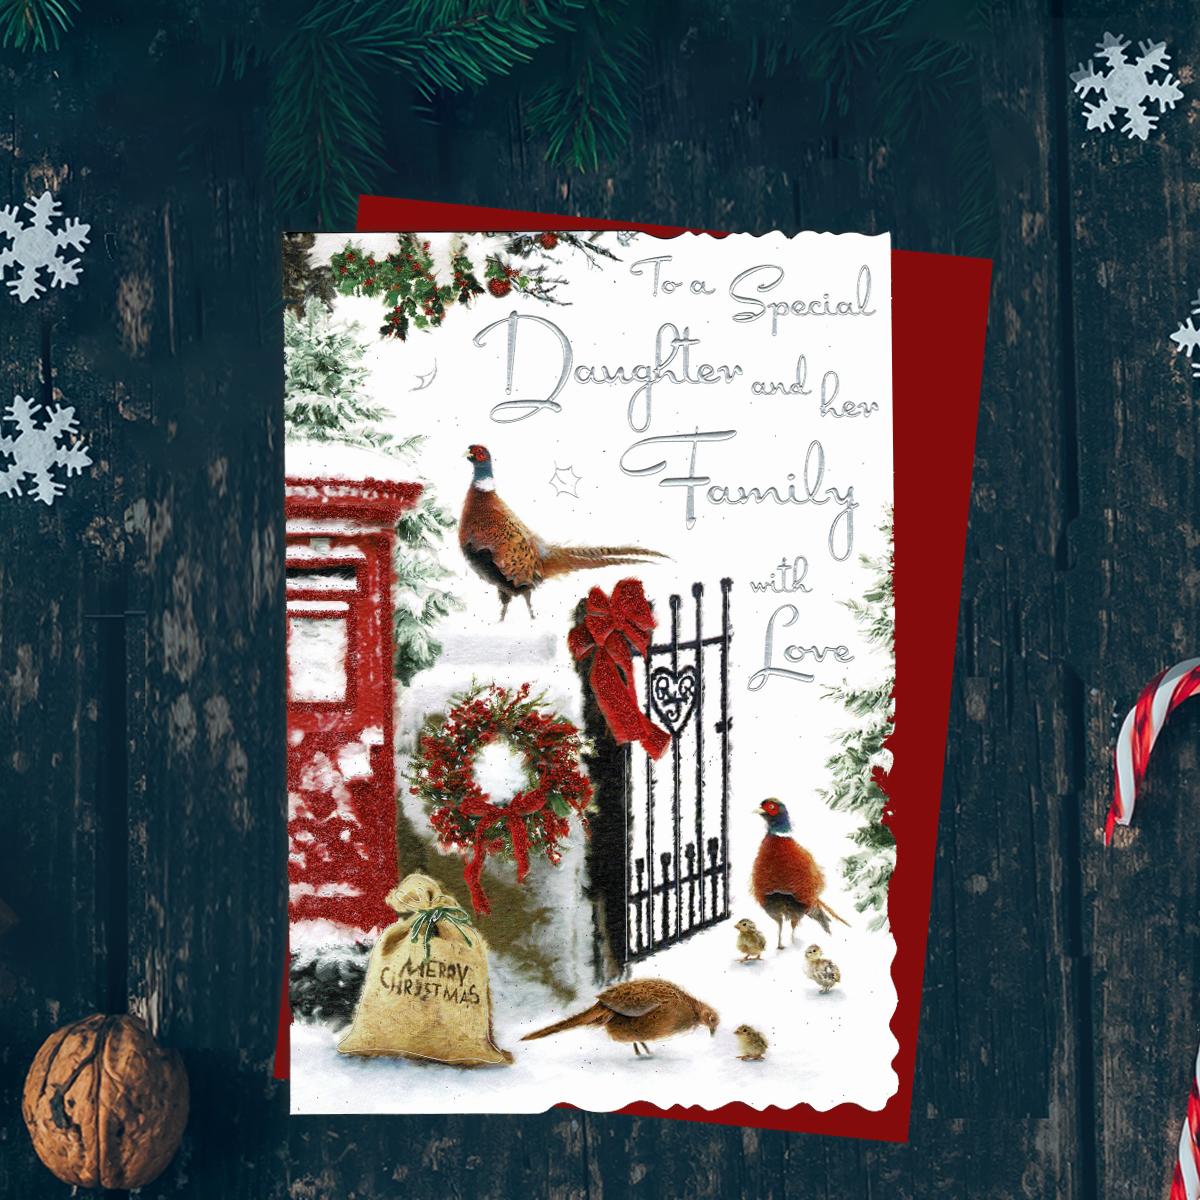 To A Special Daughter And Her Family With Love Featuring A Snowy Country Scene. Finished With Silver Foiled Lettering, Red Glitter Details, Red Envelope And Printed Insert